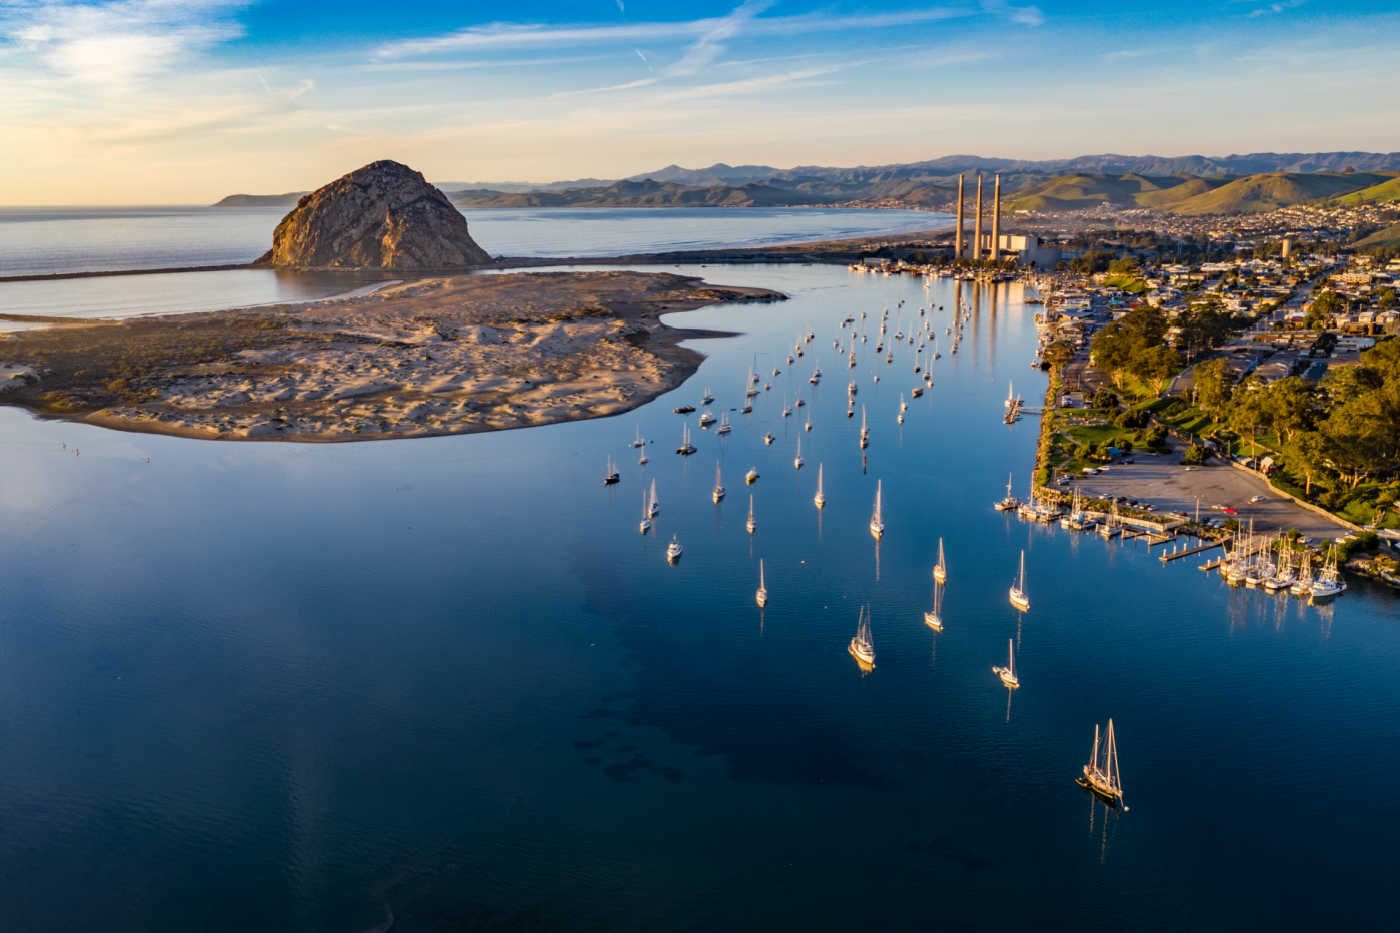 KAYAKING TO A DESERT & OTHER AMAZING THINGS TO DO IN MORRO BAY CA